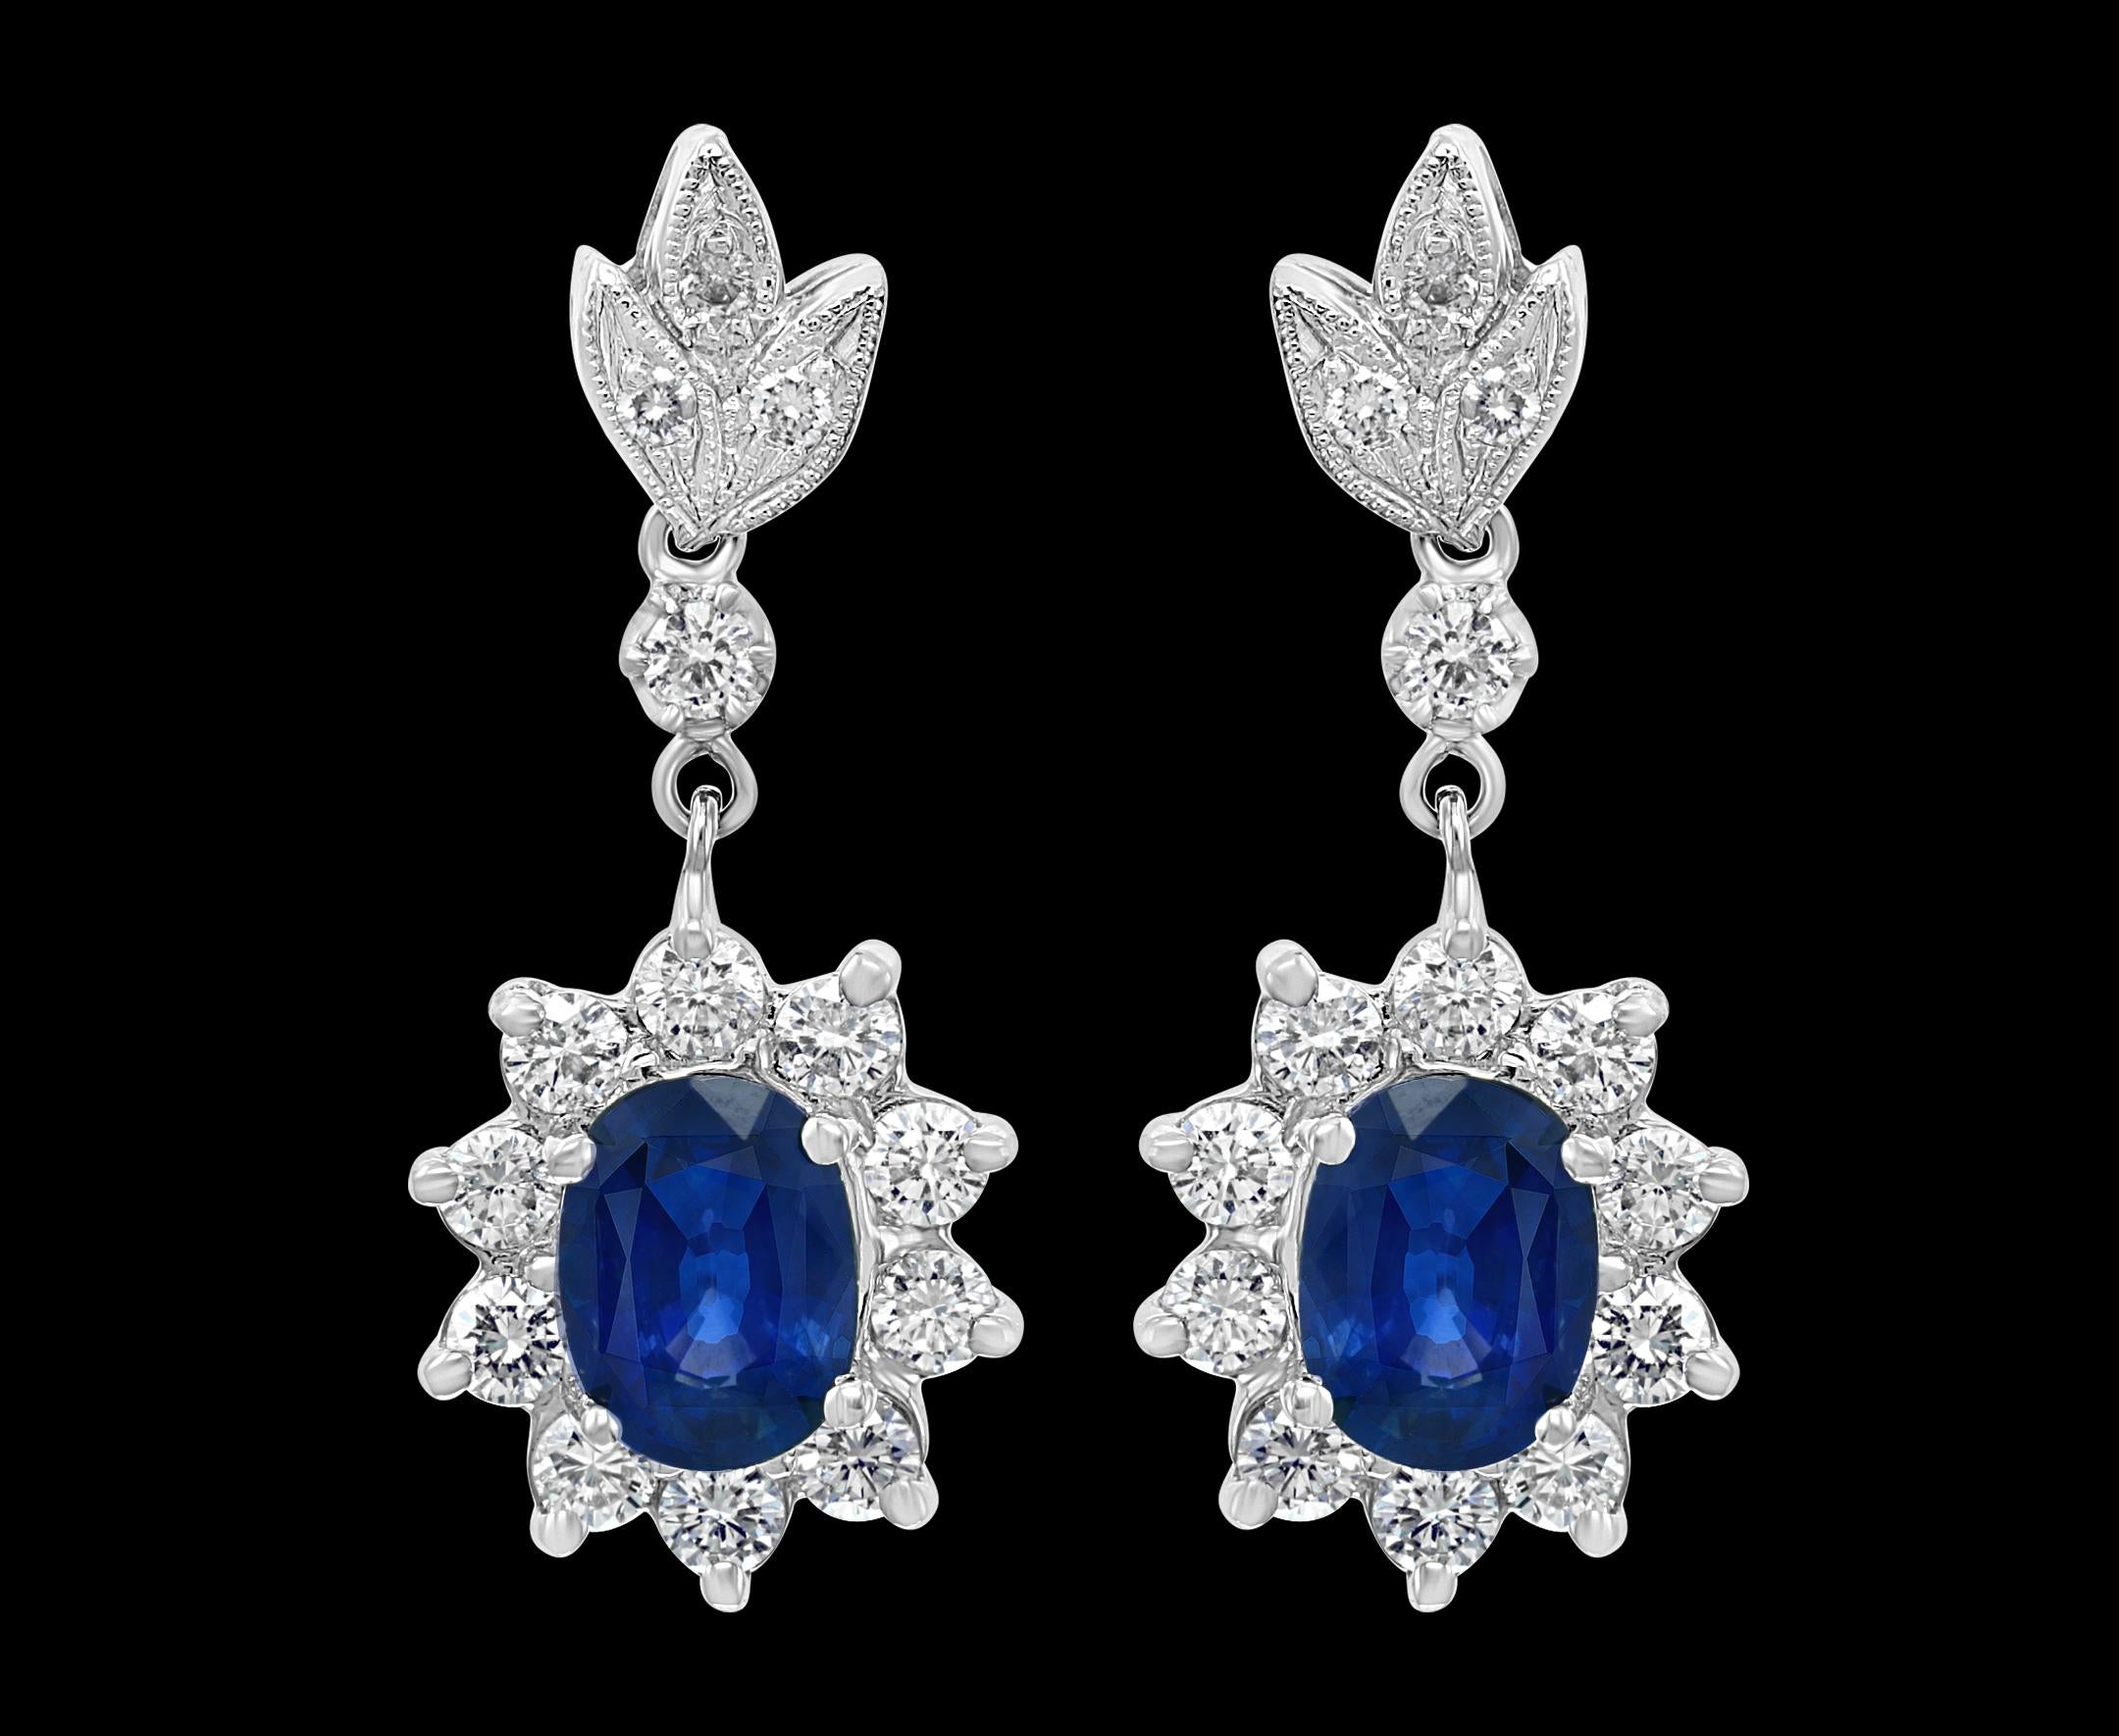 
2.5 Carat Natural Sapphire and 2.0 Carat Diamond Hanging Earring 14 Karat Gold
 perfect pair made in  14 Karat white gold . 
14 K gold 7 Grams
 Diamonds: approximate 2.0 carat , Very nice shiny diamonds , all eye clean with lots of bling 
Sapphires